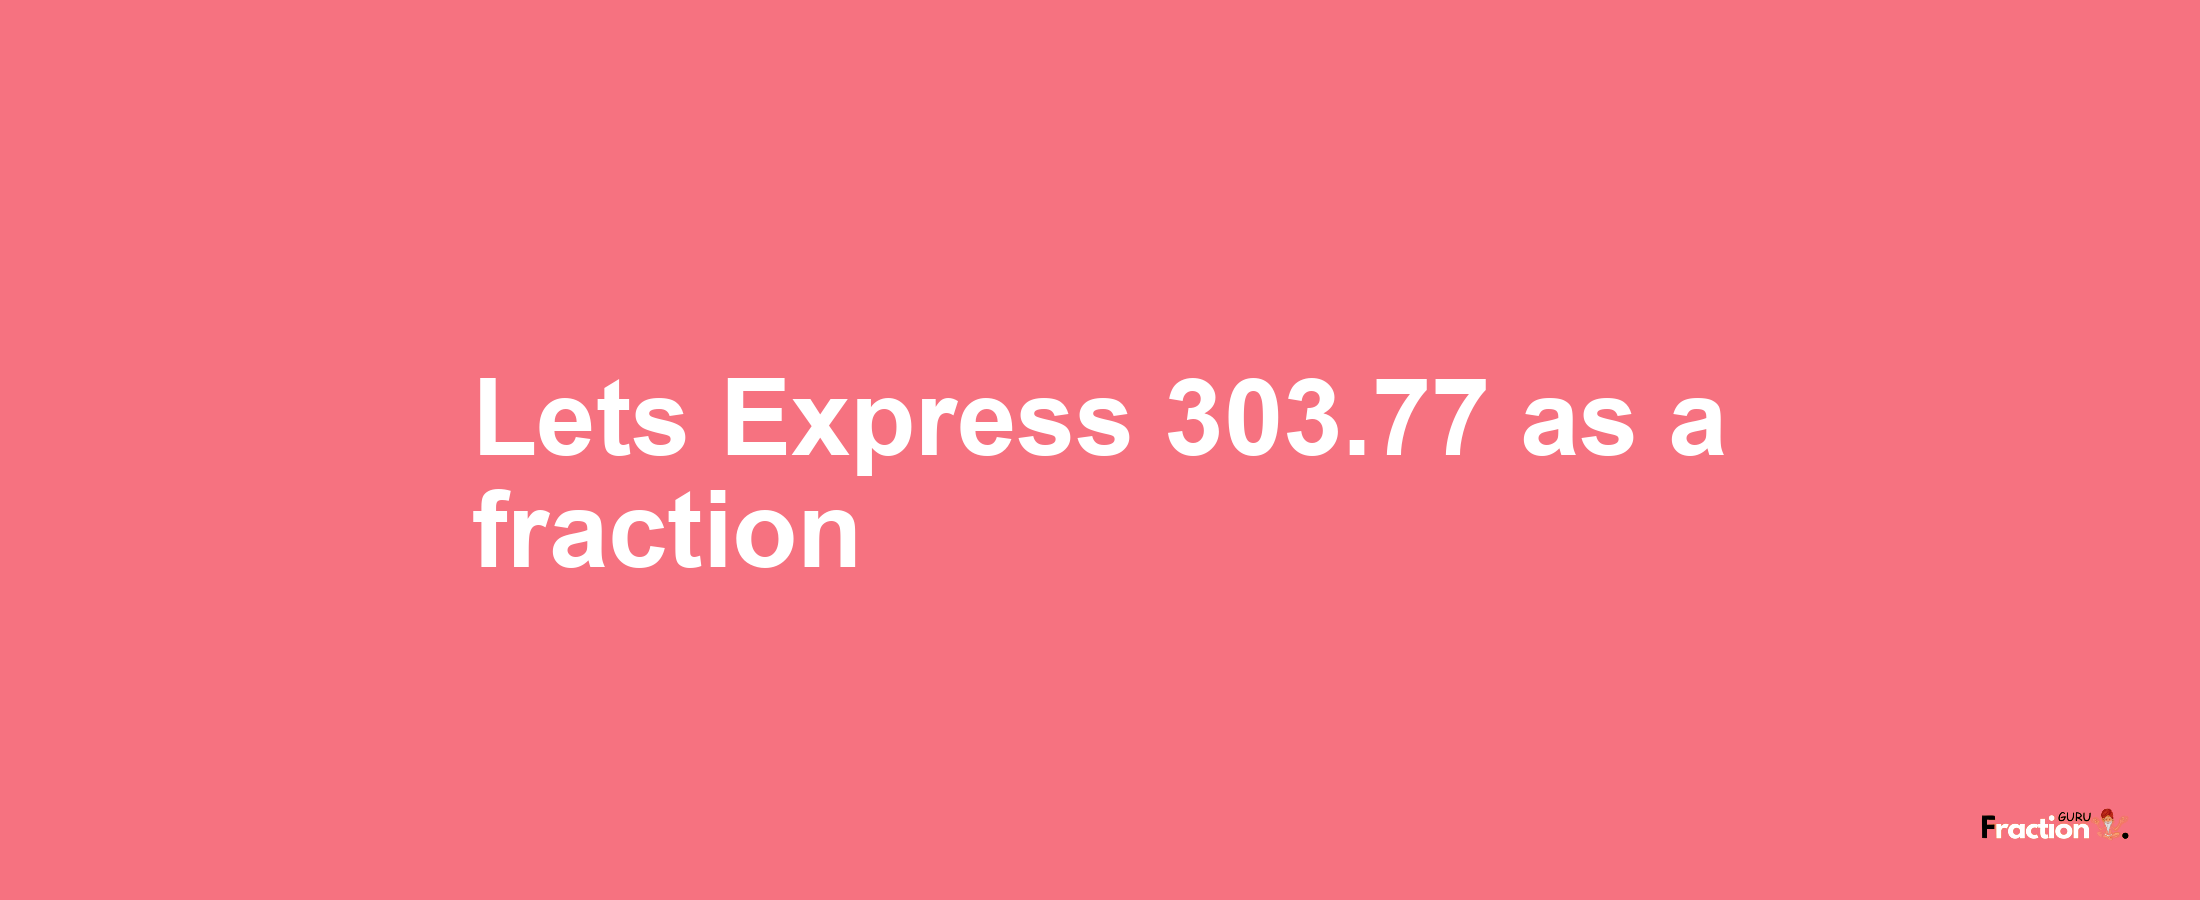 Lets Express 303.77 as afraction